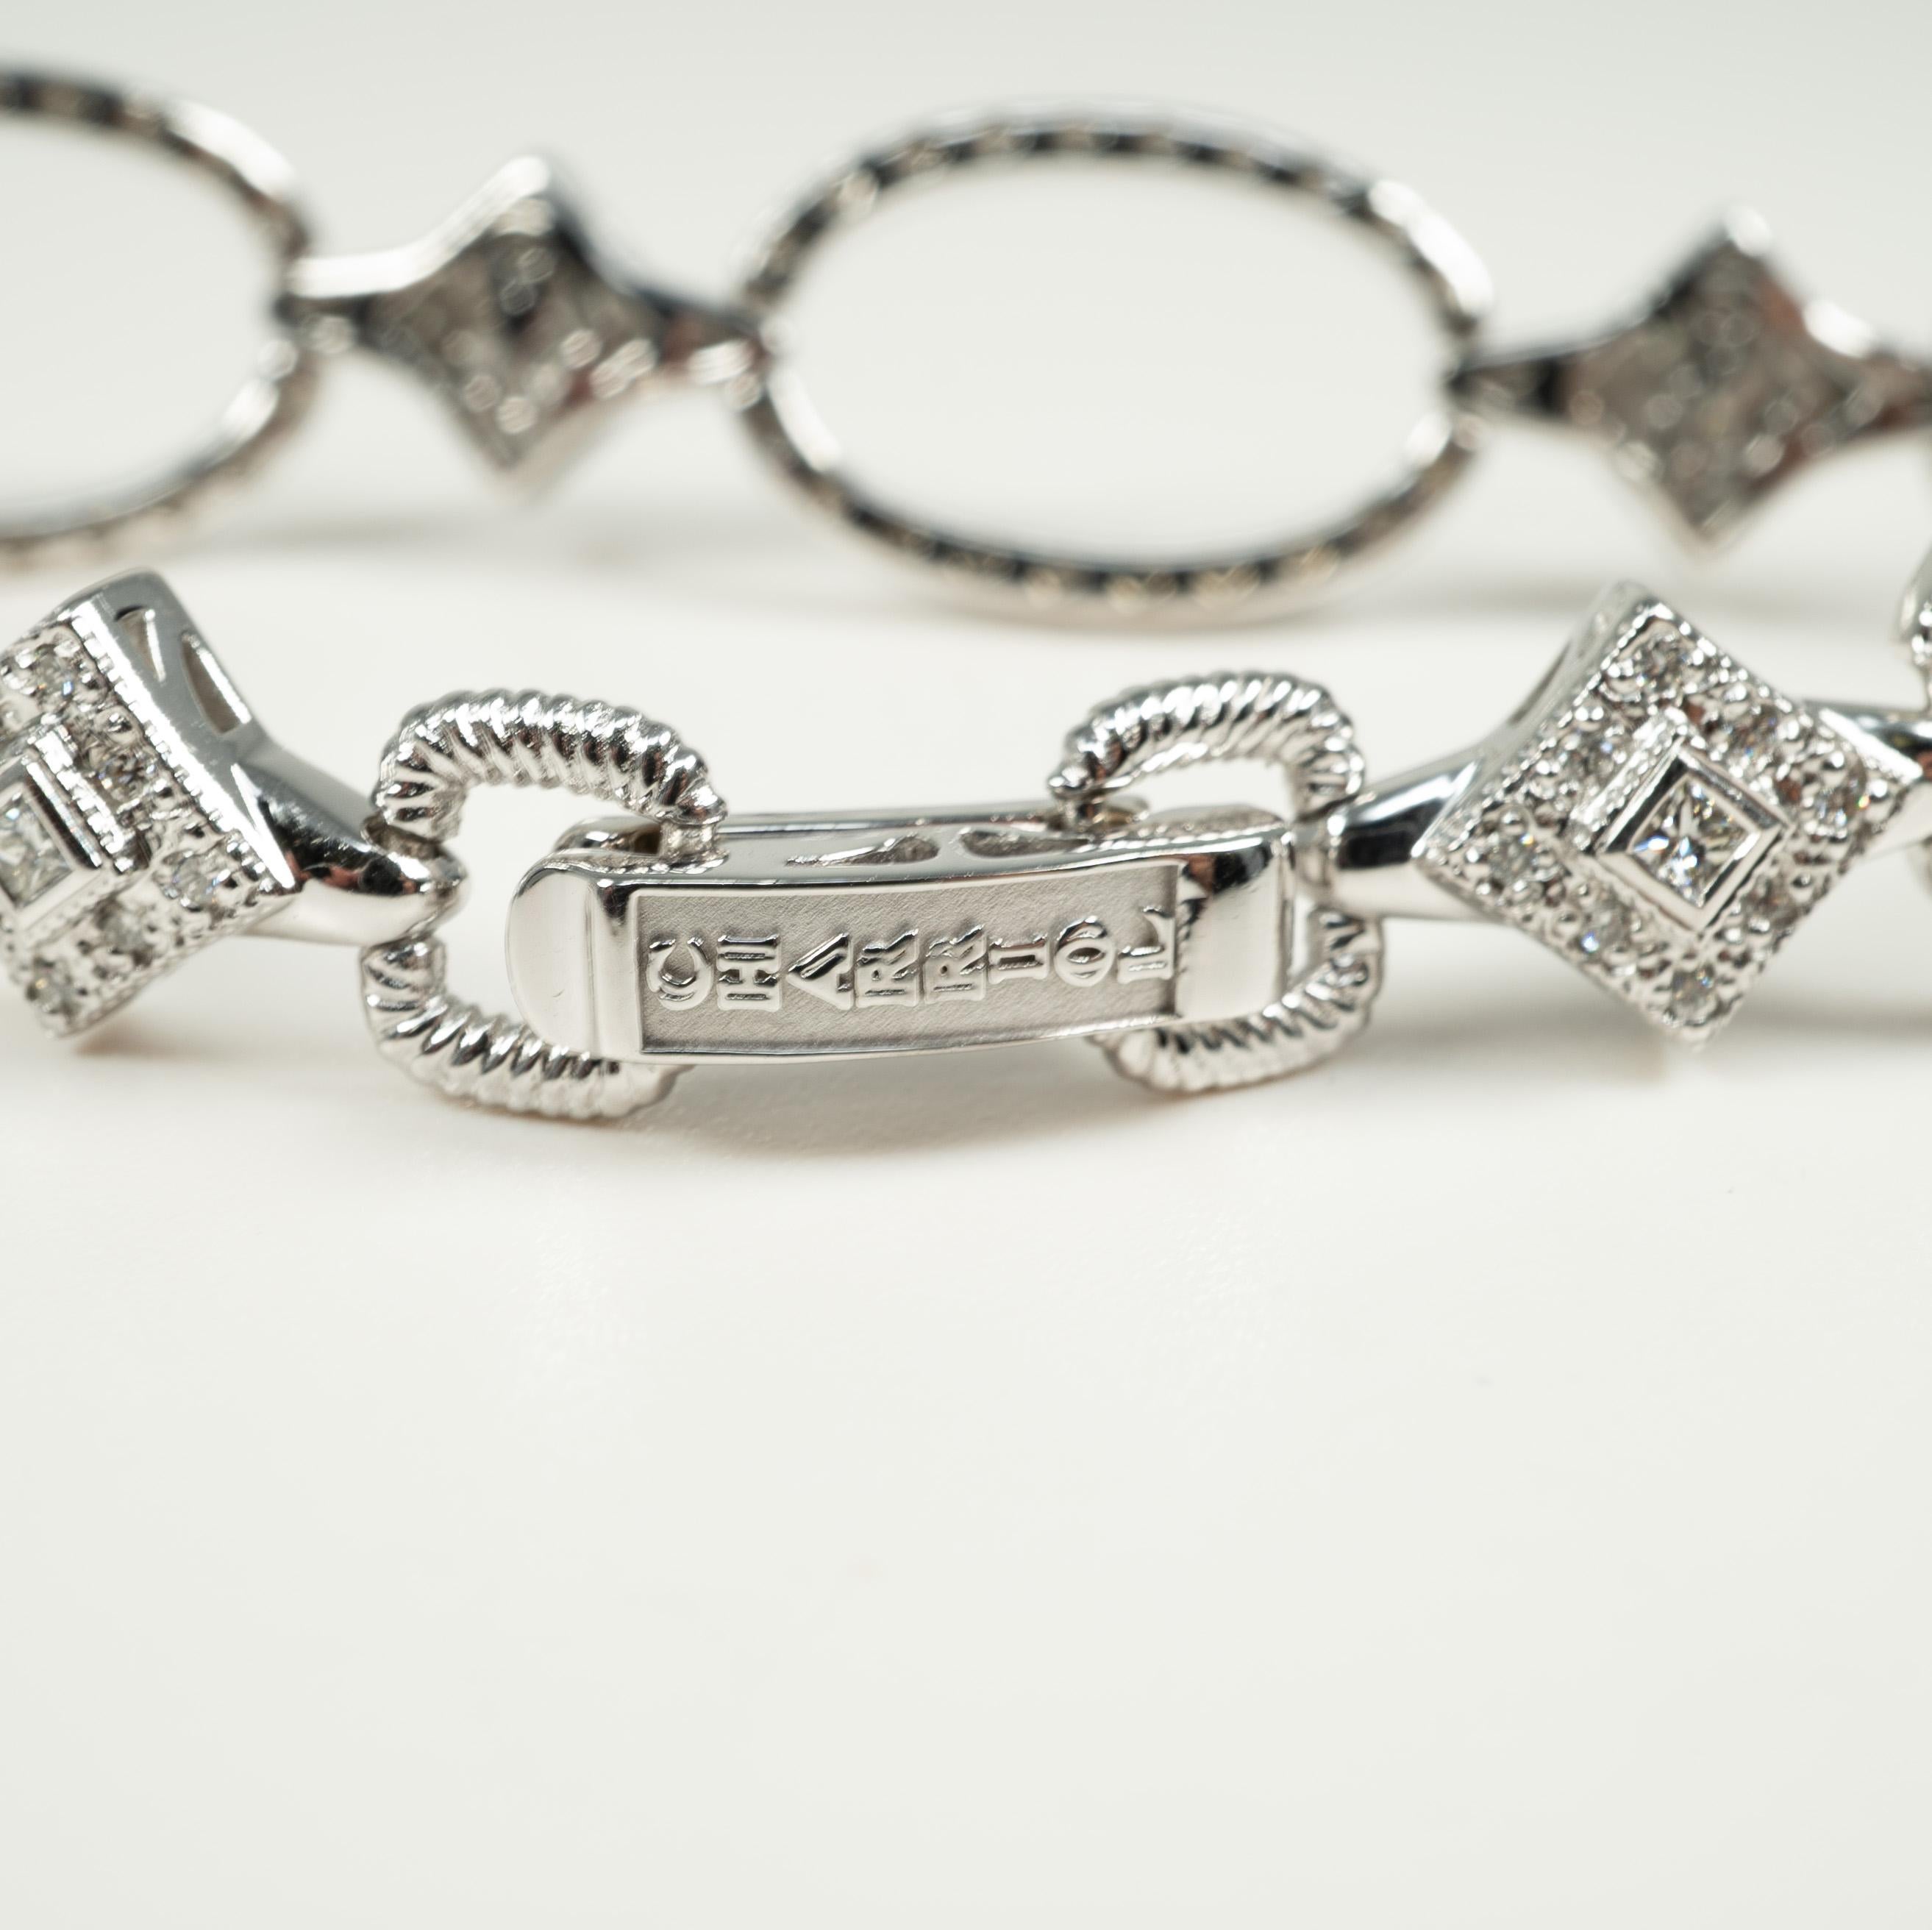 This stunning 18 karat white gold bracelet by Charriol supports 1.30 carats of lovely diamonds!